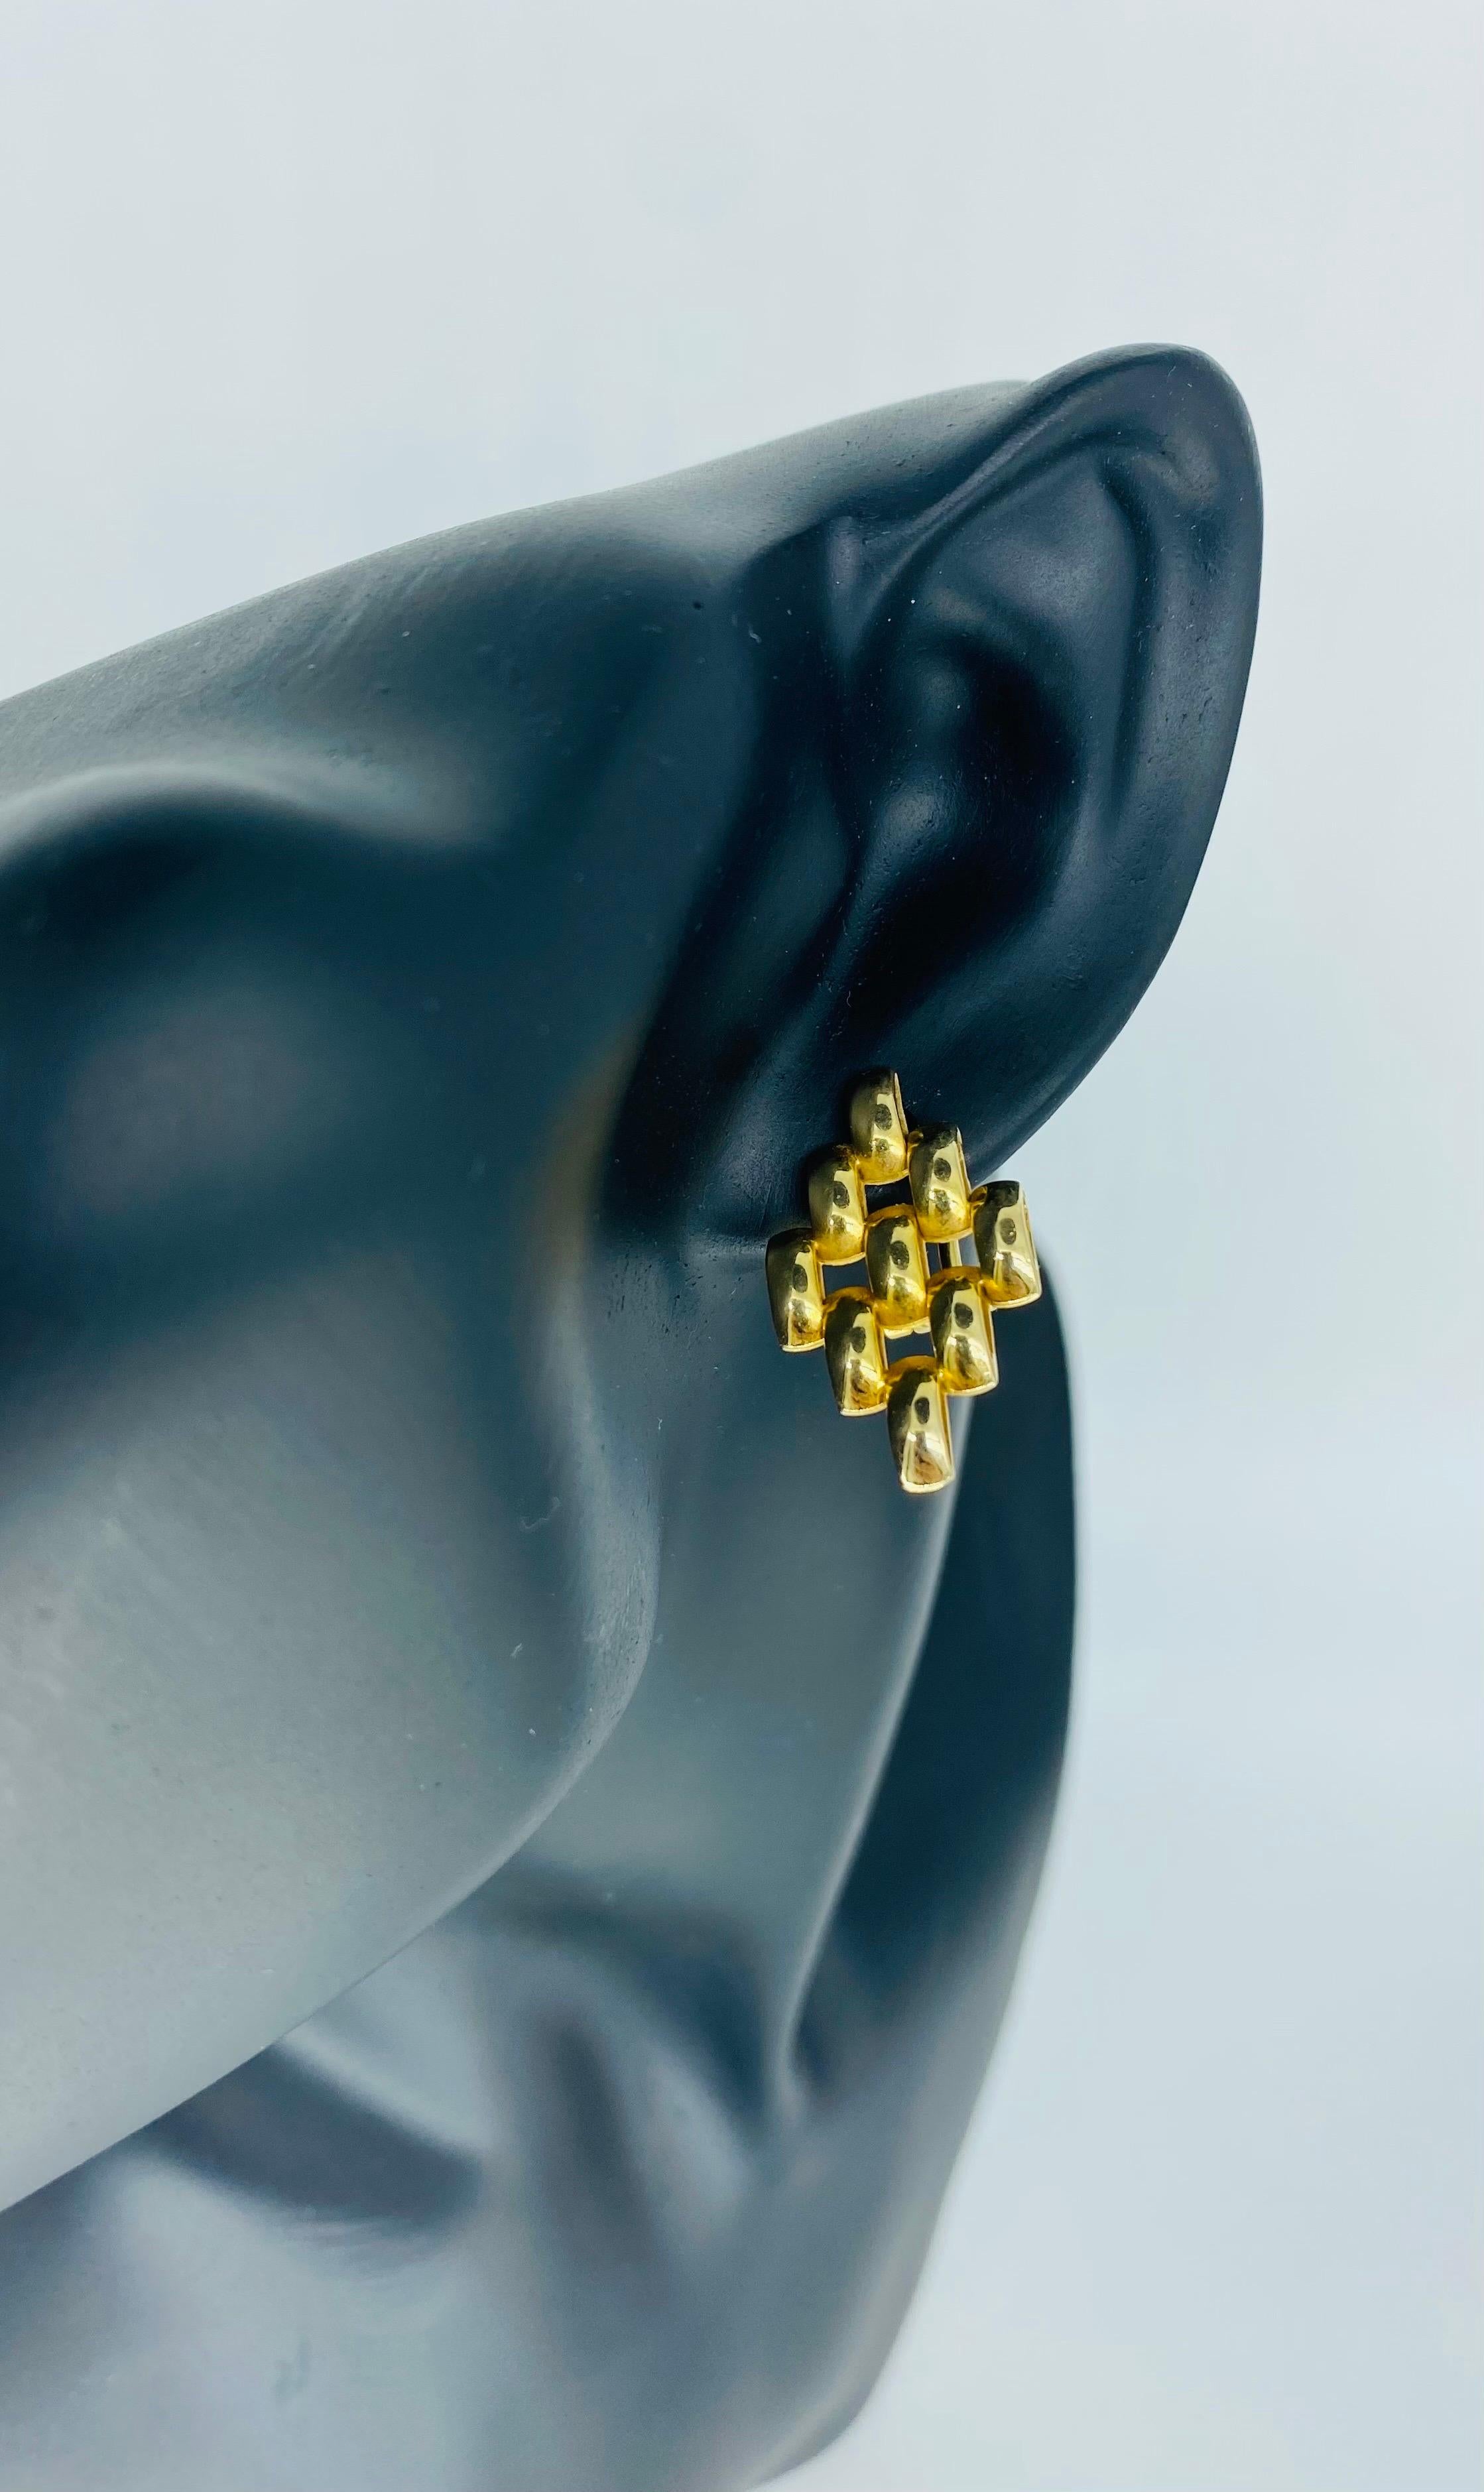 Loro Italian 14k Gold a abstract Design Clip Earrings. The earrings are made by Italian designer Loro and features an abstract design. The earrings measure 15.4mm X 25.75mm and weights 6.4 grams solid gold 14k. The earrings have a back clip closure